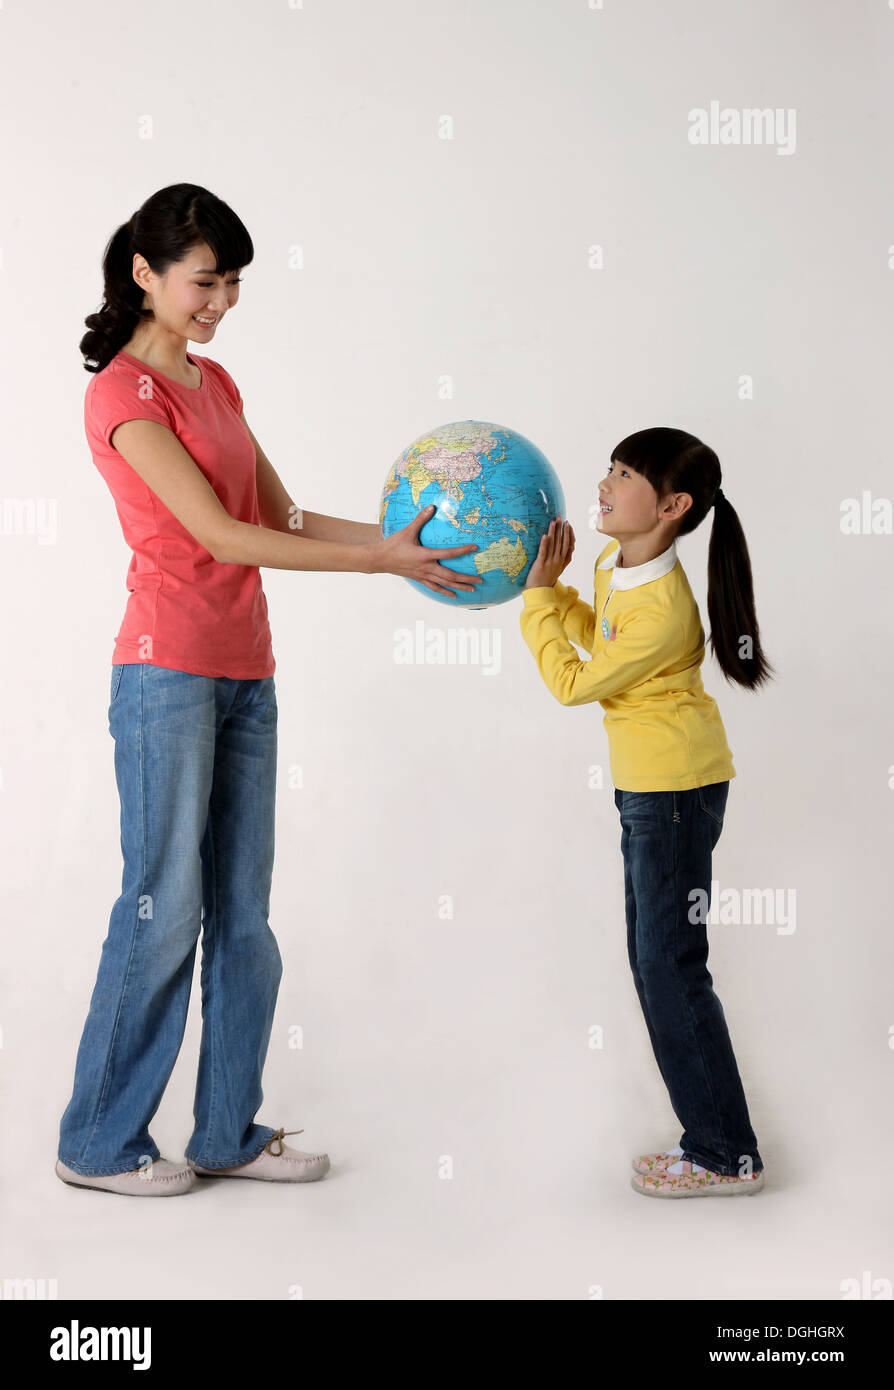 East Asian mother and daughter standing on the floor holding a globe, looking at each other Stock Photo